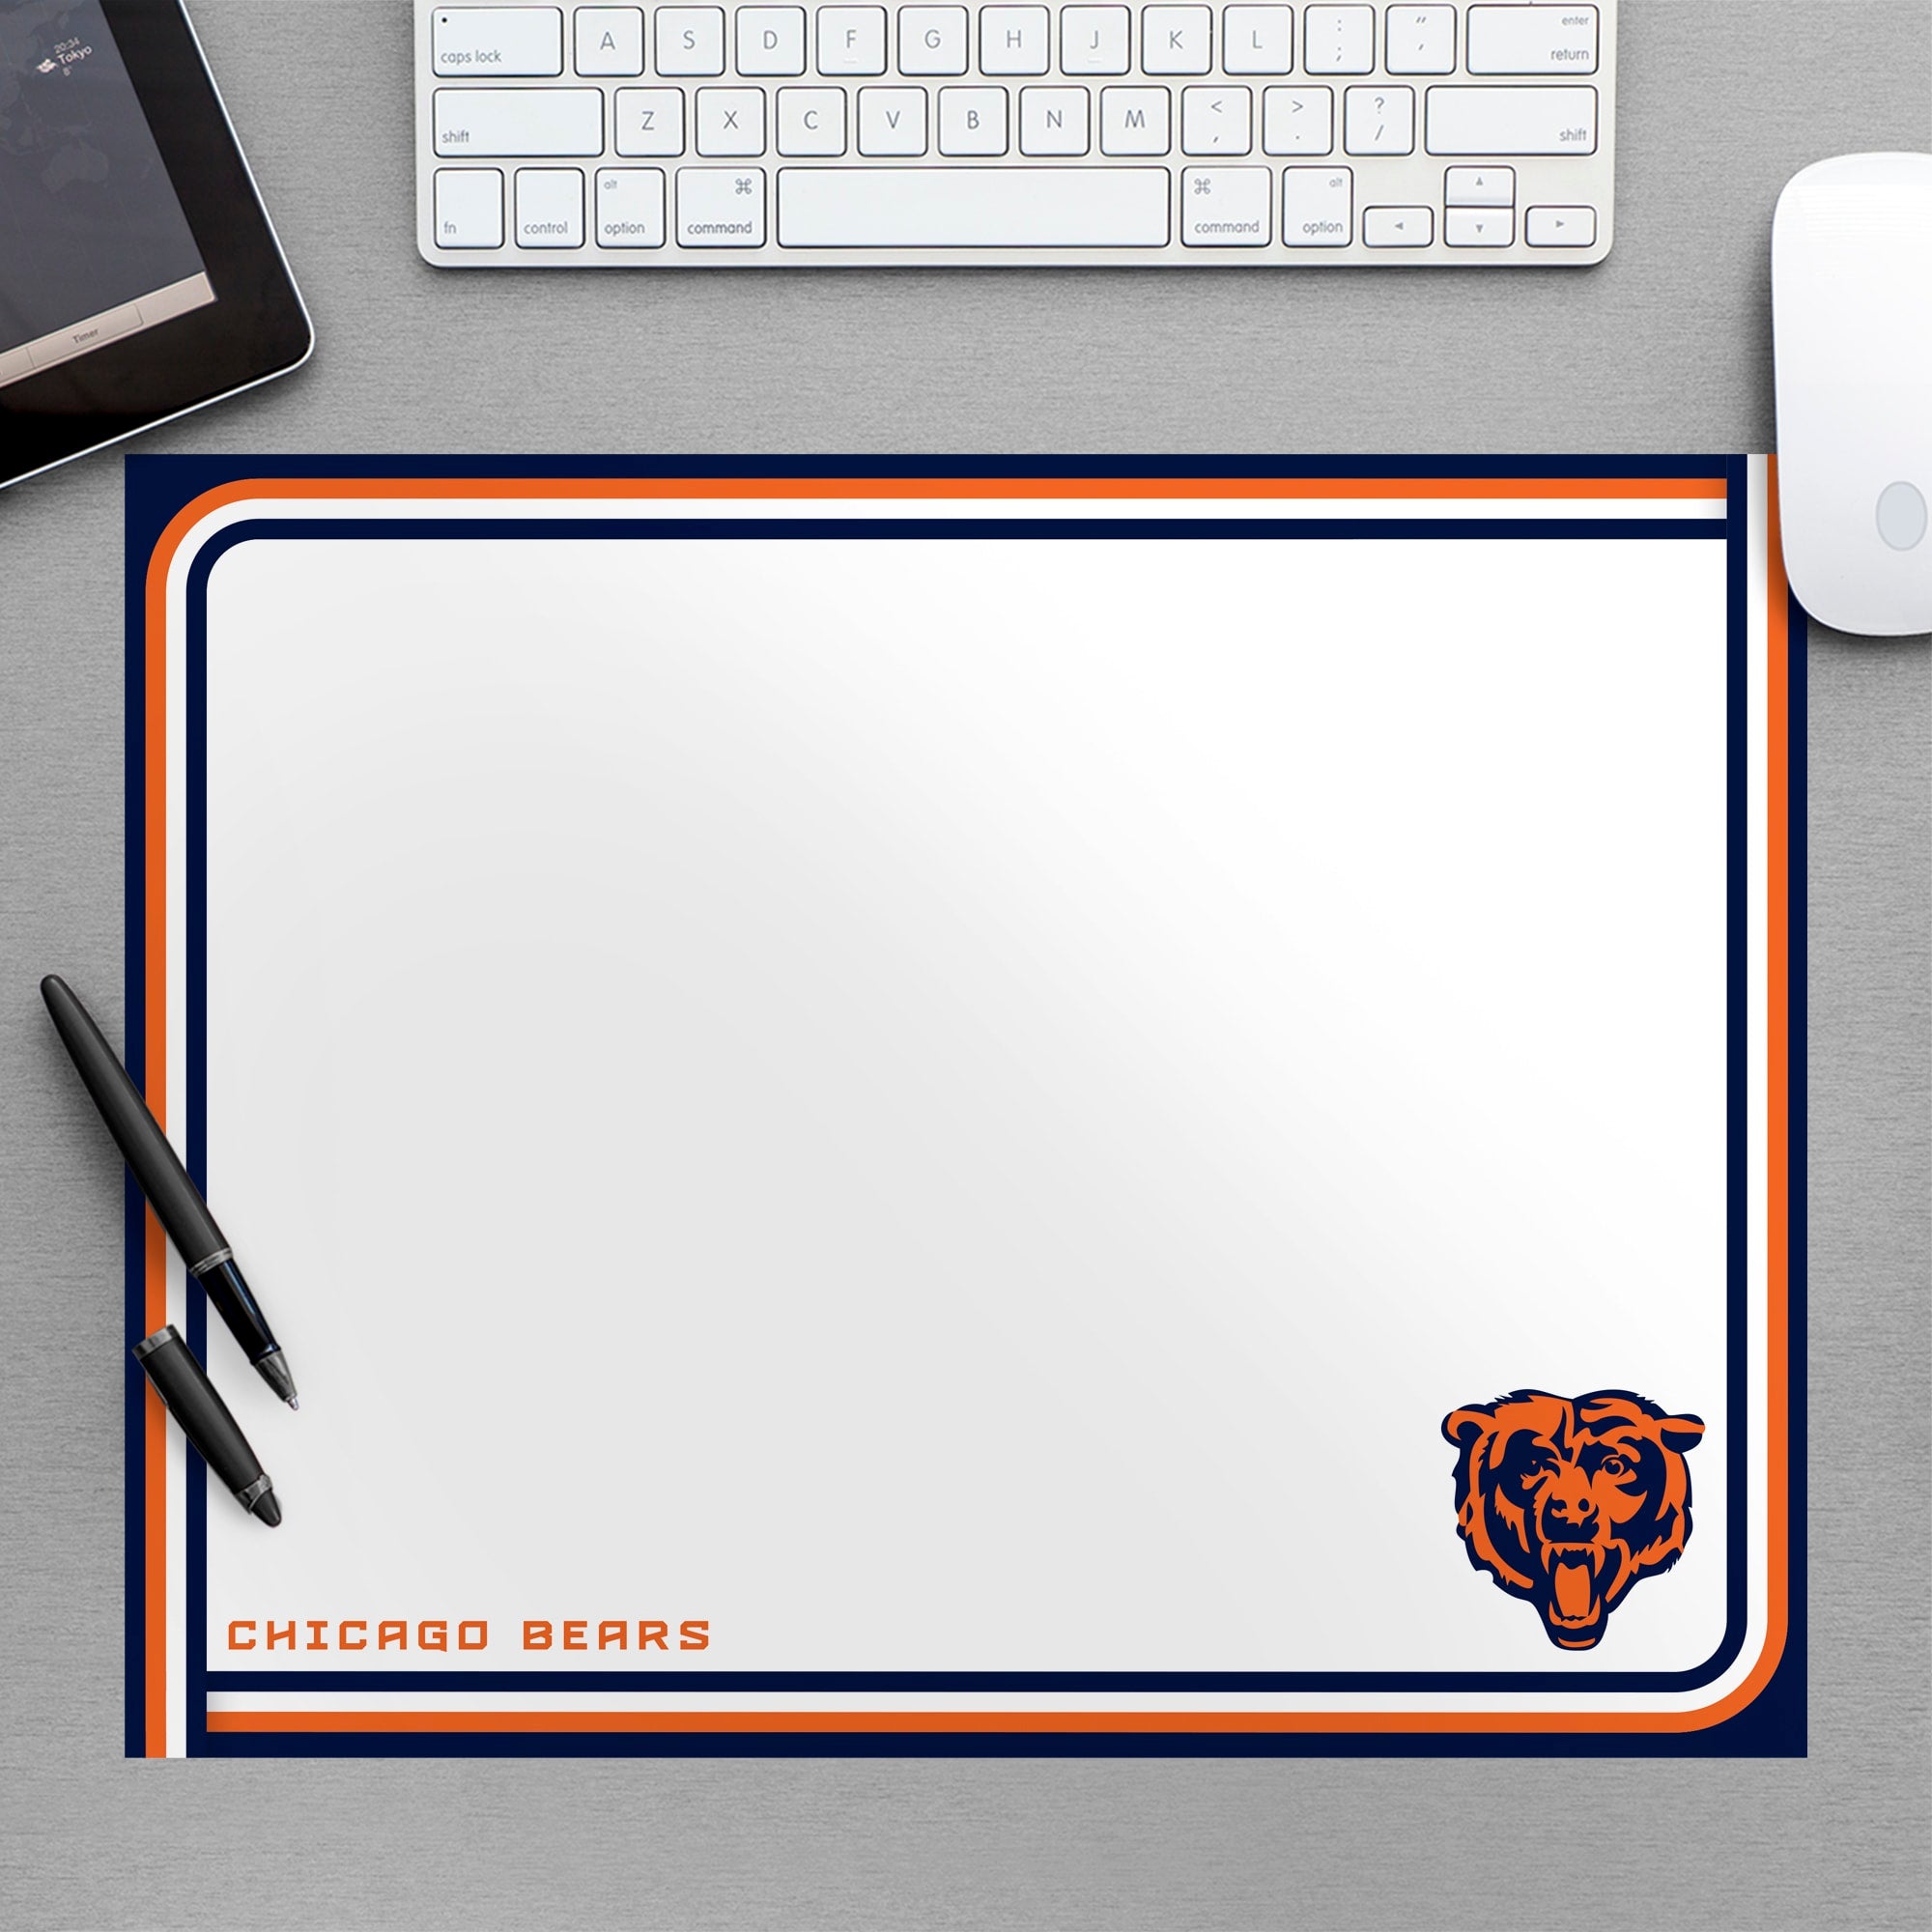 Chicago Bears: Dry Erase Whiteboard - Officially Licensed NFL Removable Wall Decal Large by Fathead | Vinyl